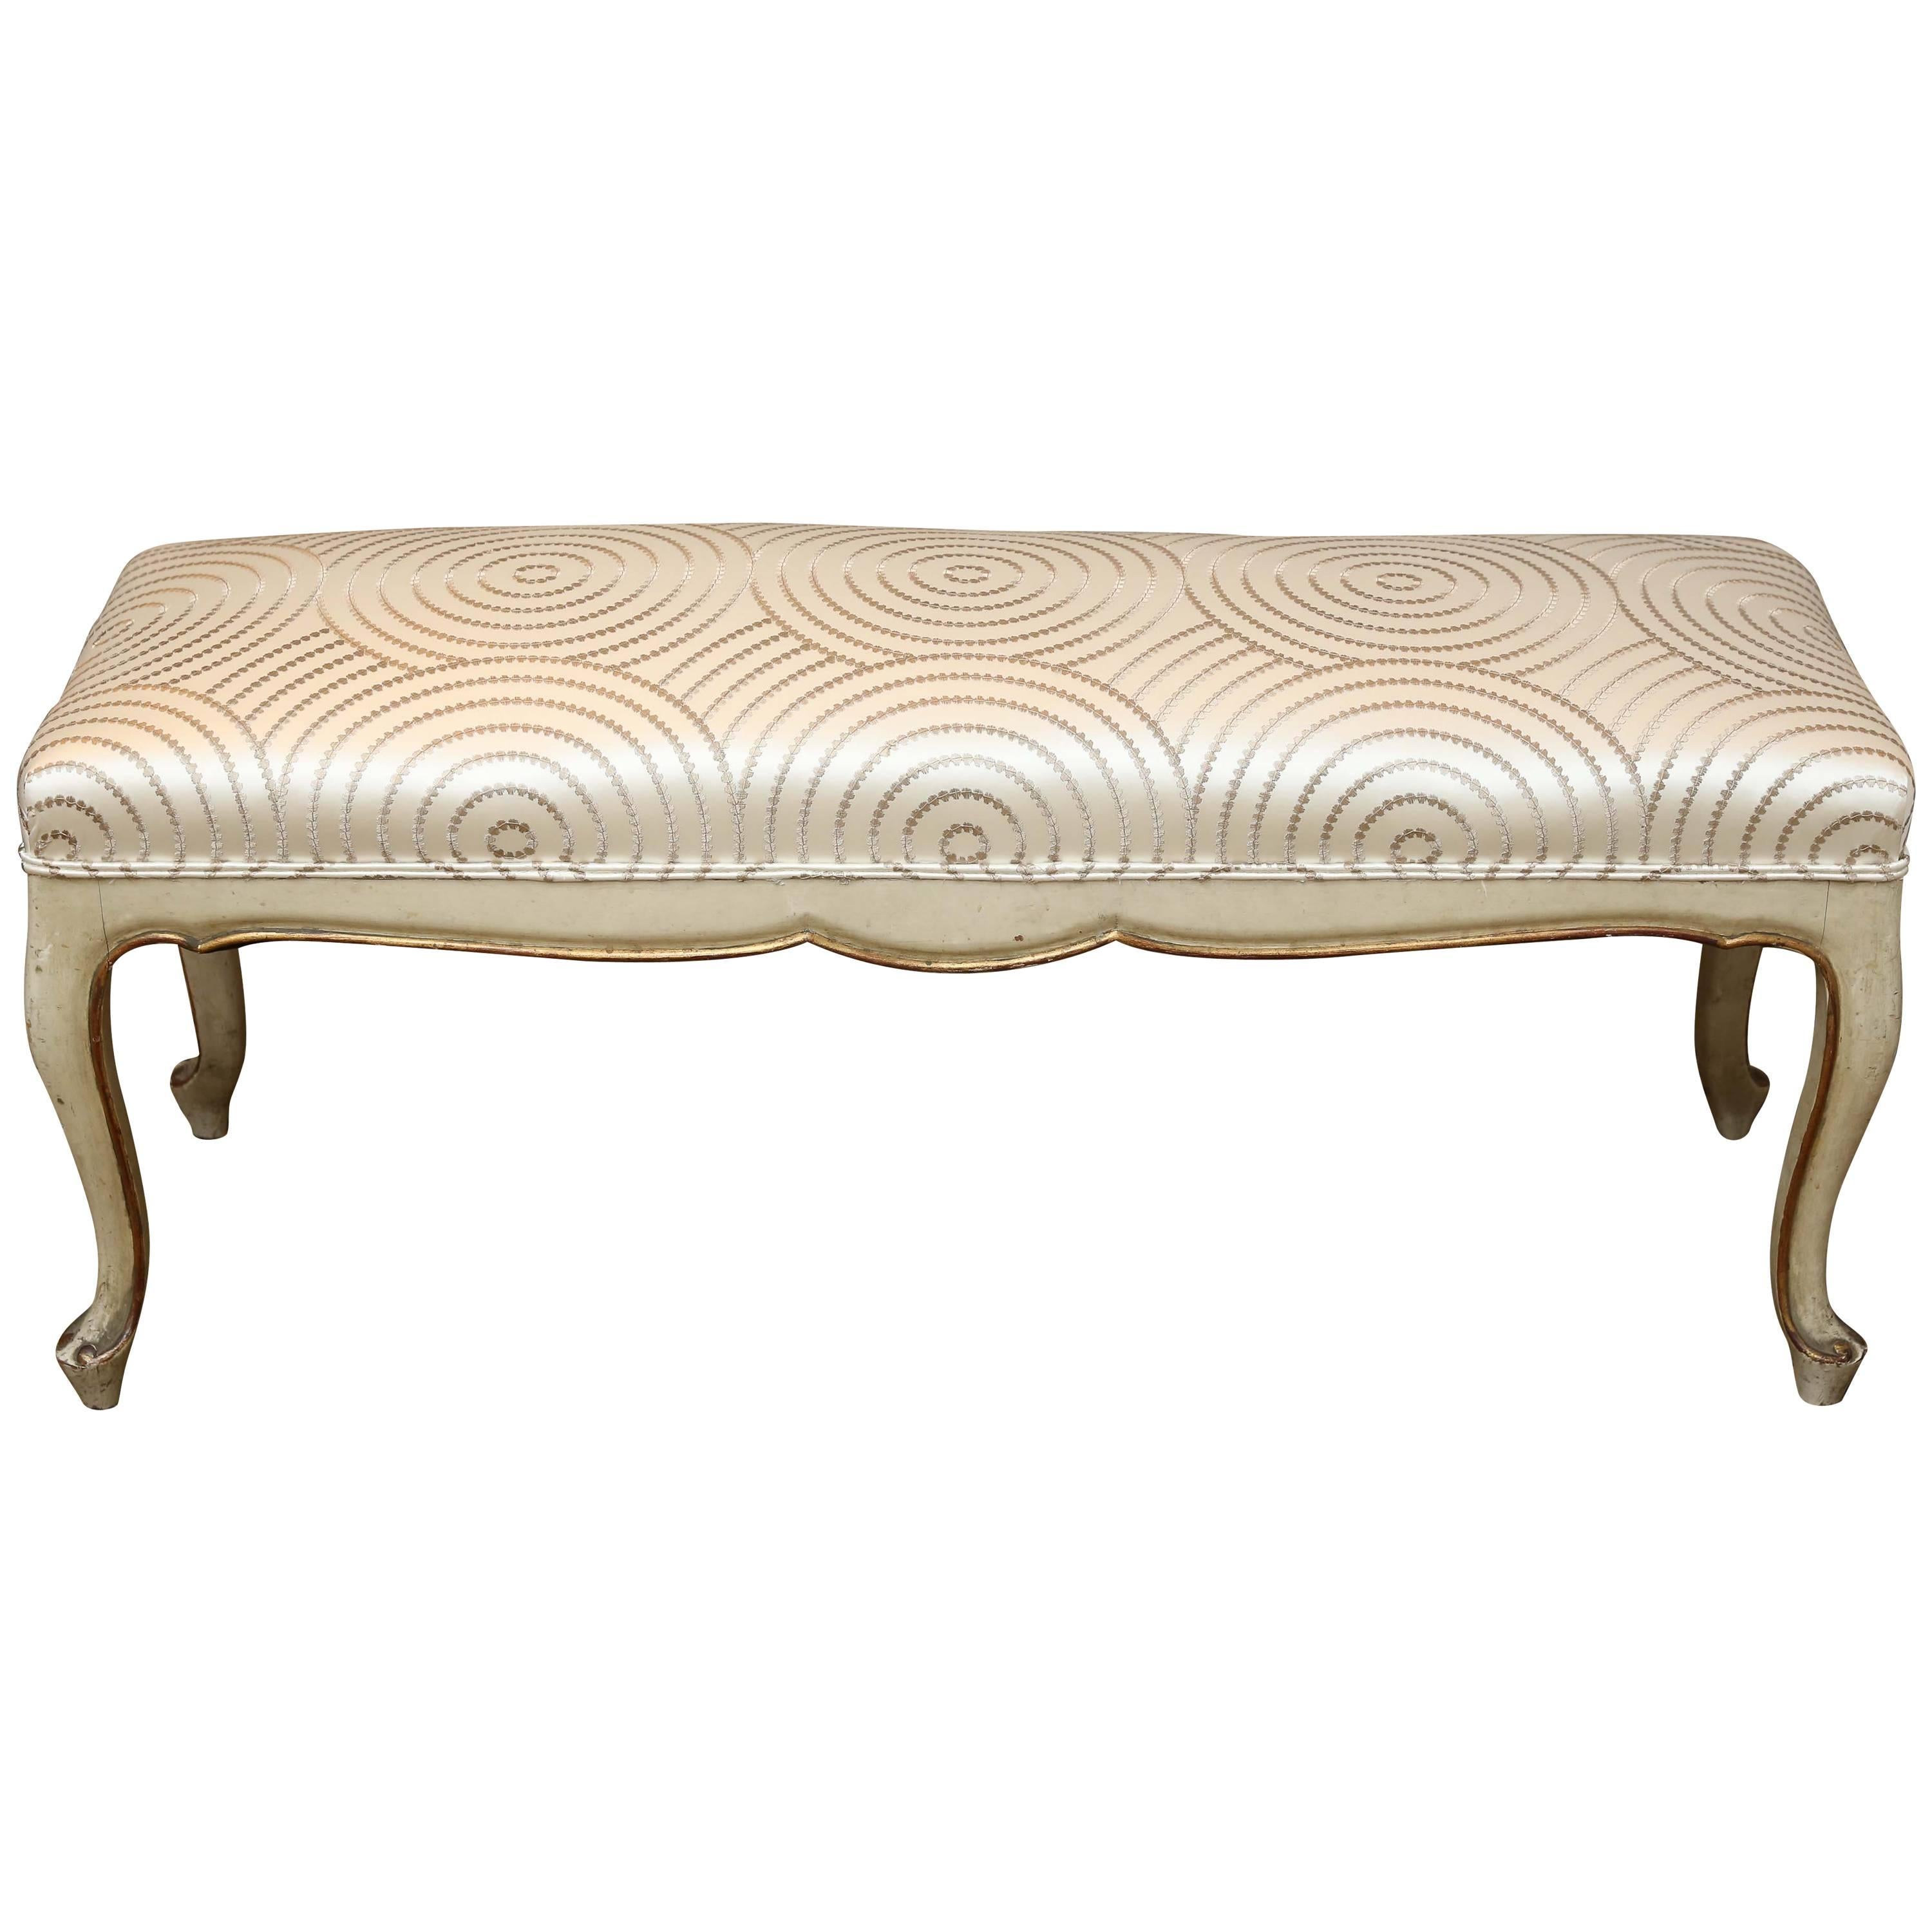 Late 19th Century Painted and Gilt Spanish Bench with Cabriolet Leg